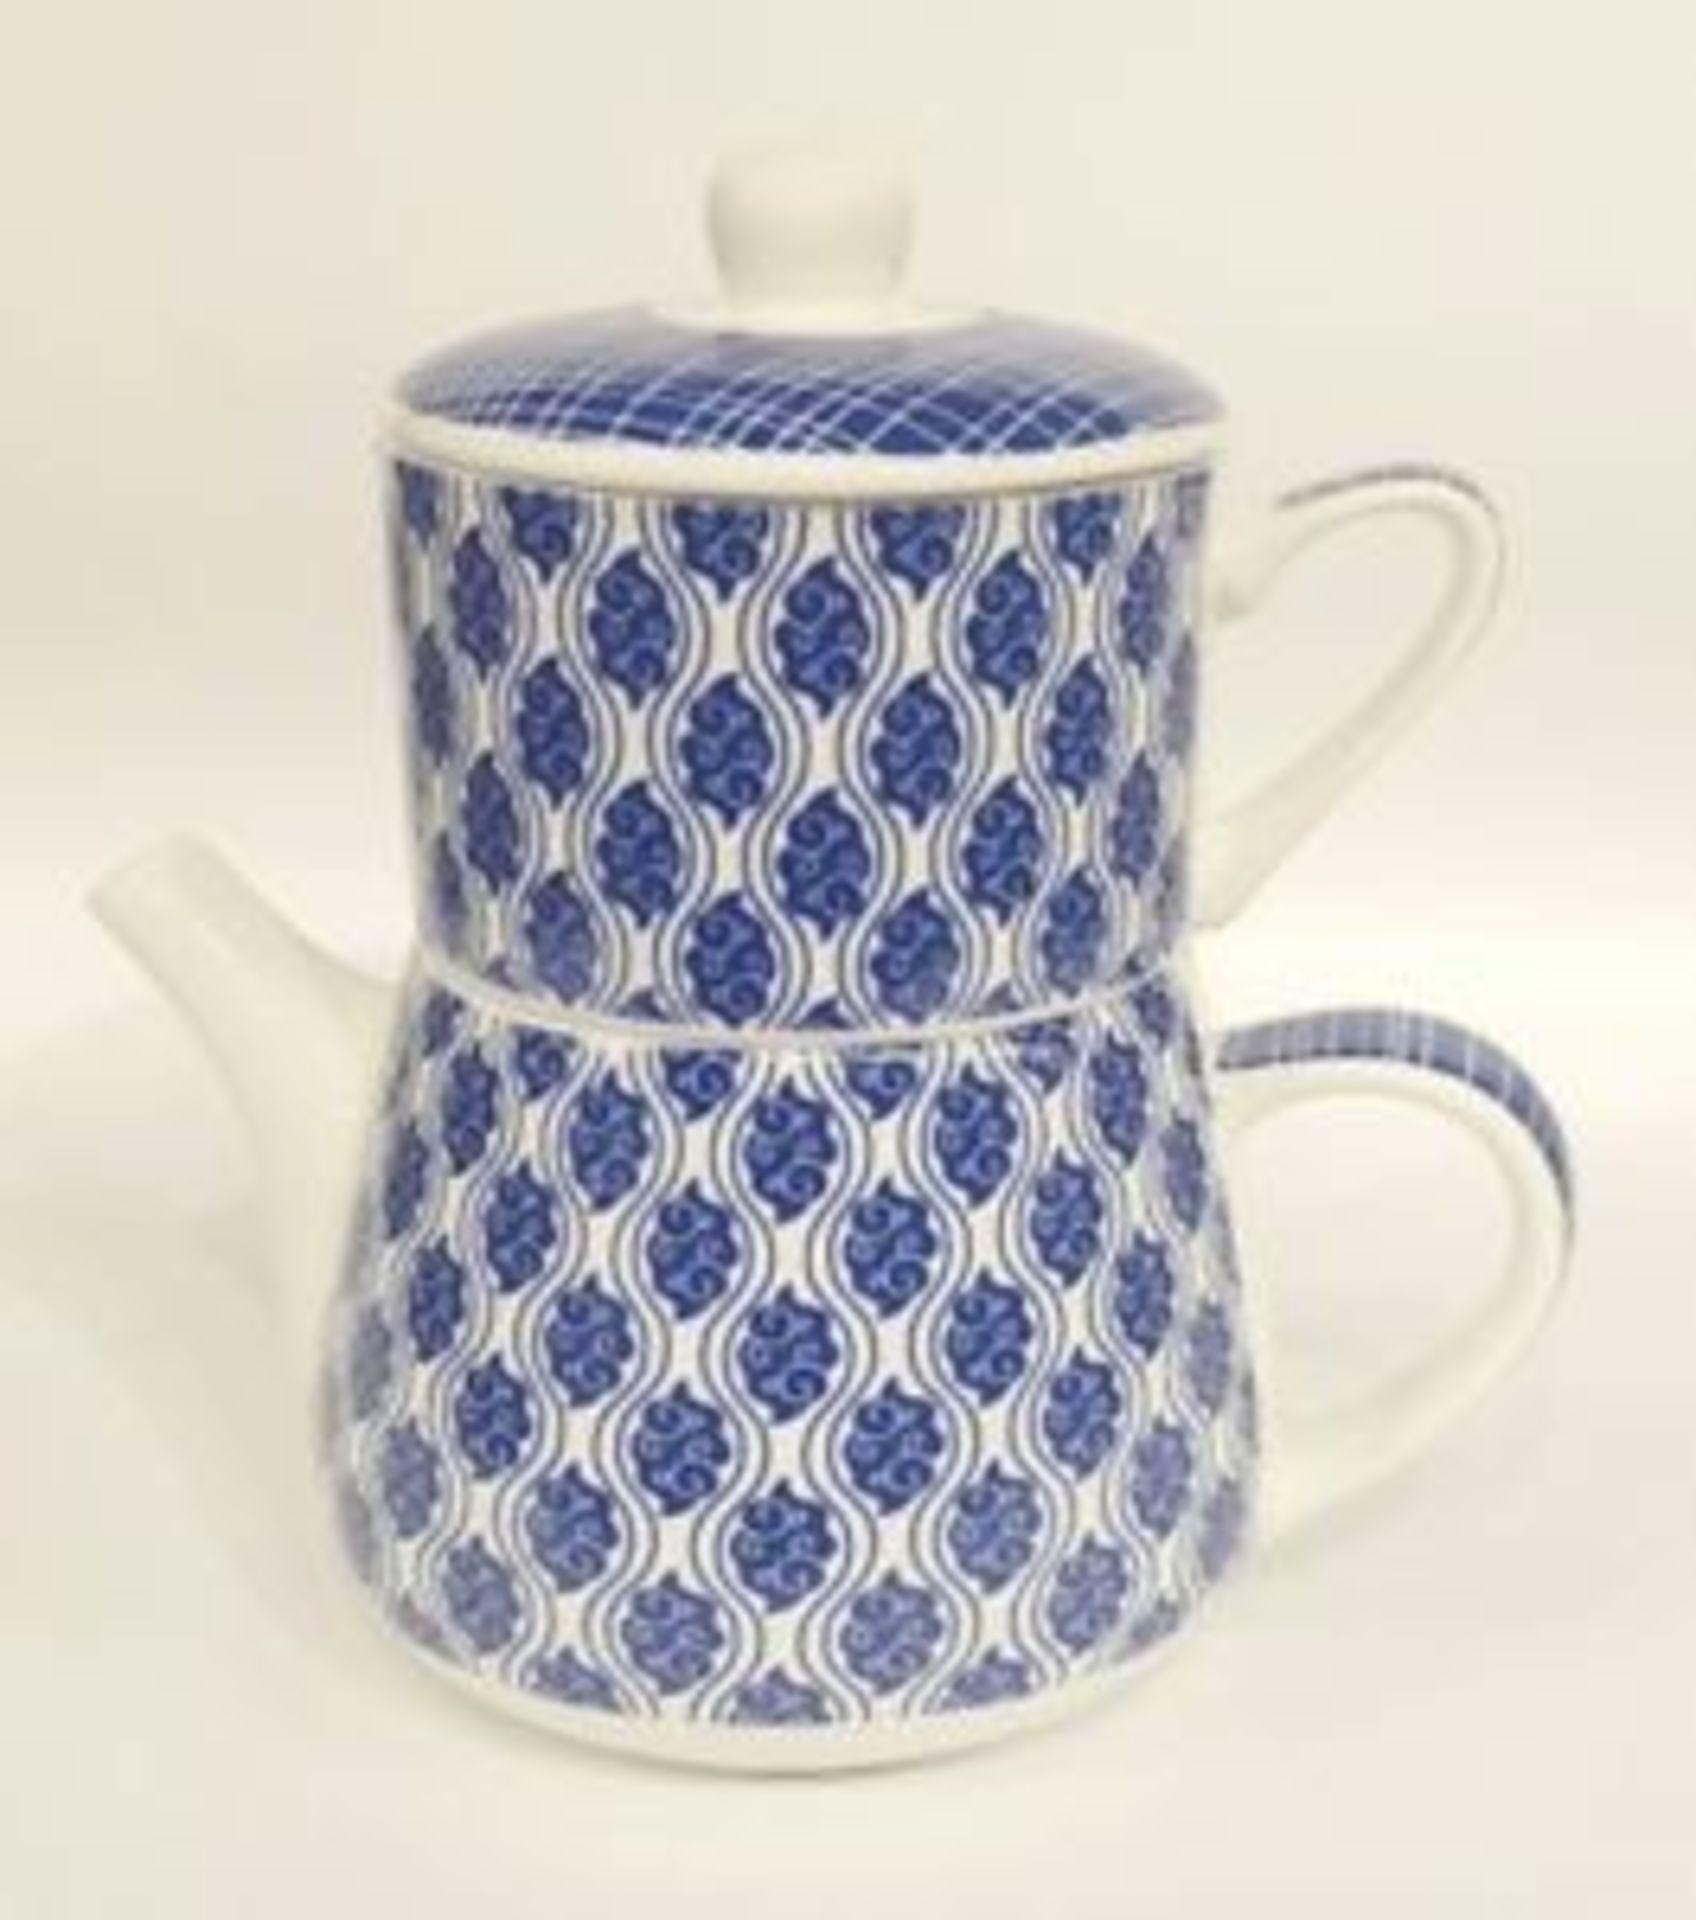 V Brand New Nippon By Jameson + Tailor Blue Lines And Paisley Tea For One (Similar To Image Shown)